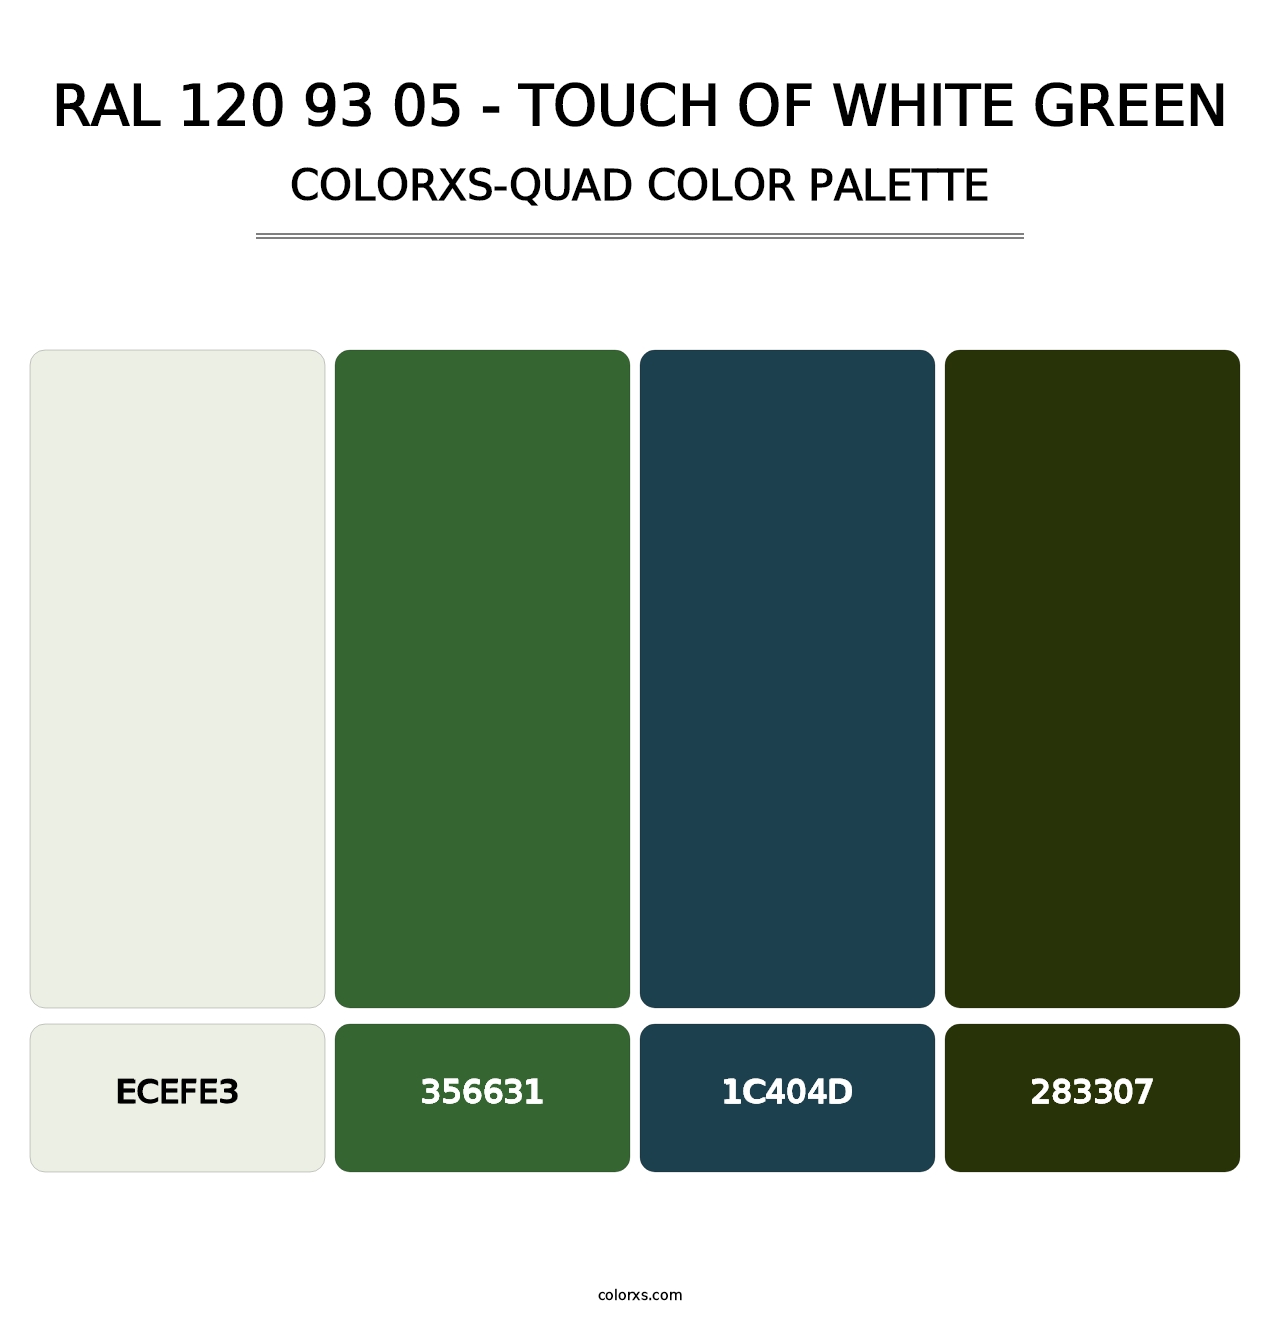 RAL 120 93 05 - Touch Of White Green - Colorxs Quad Palette